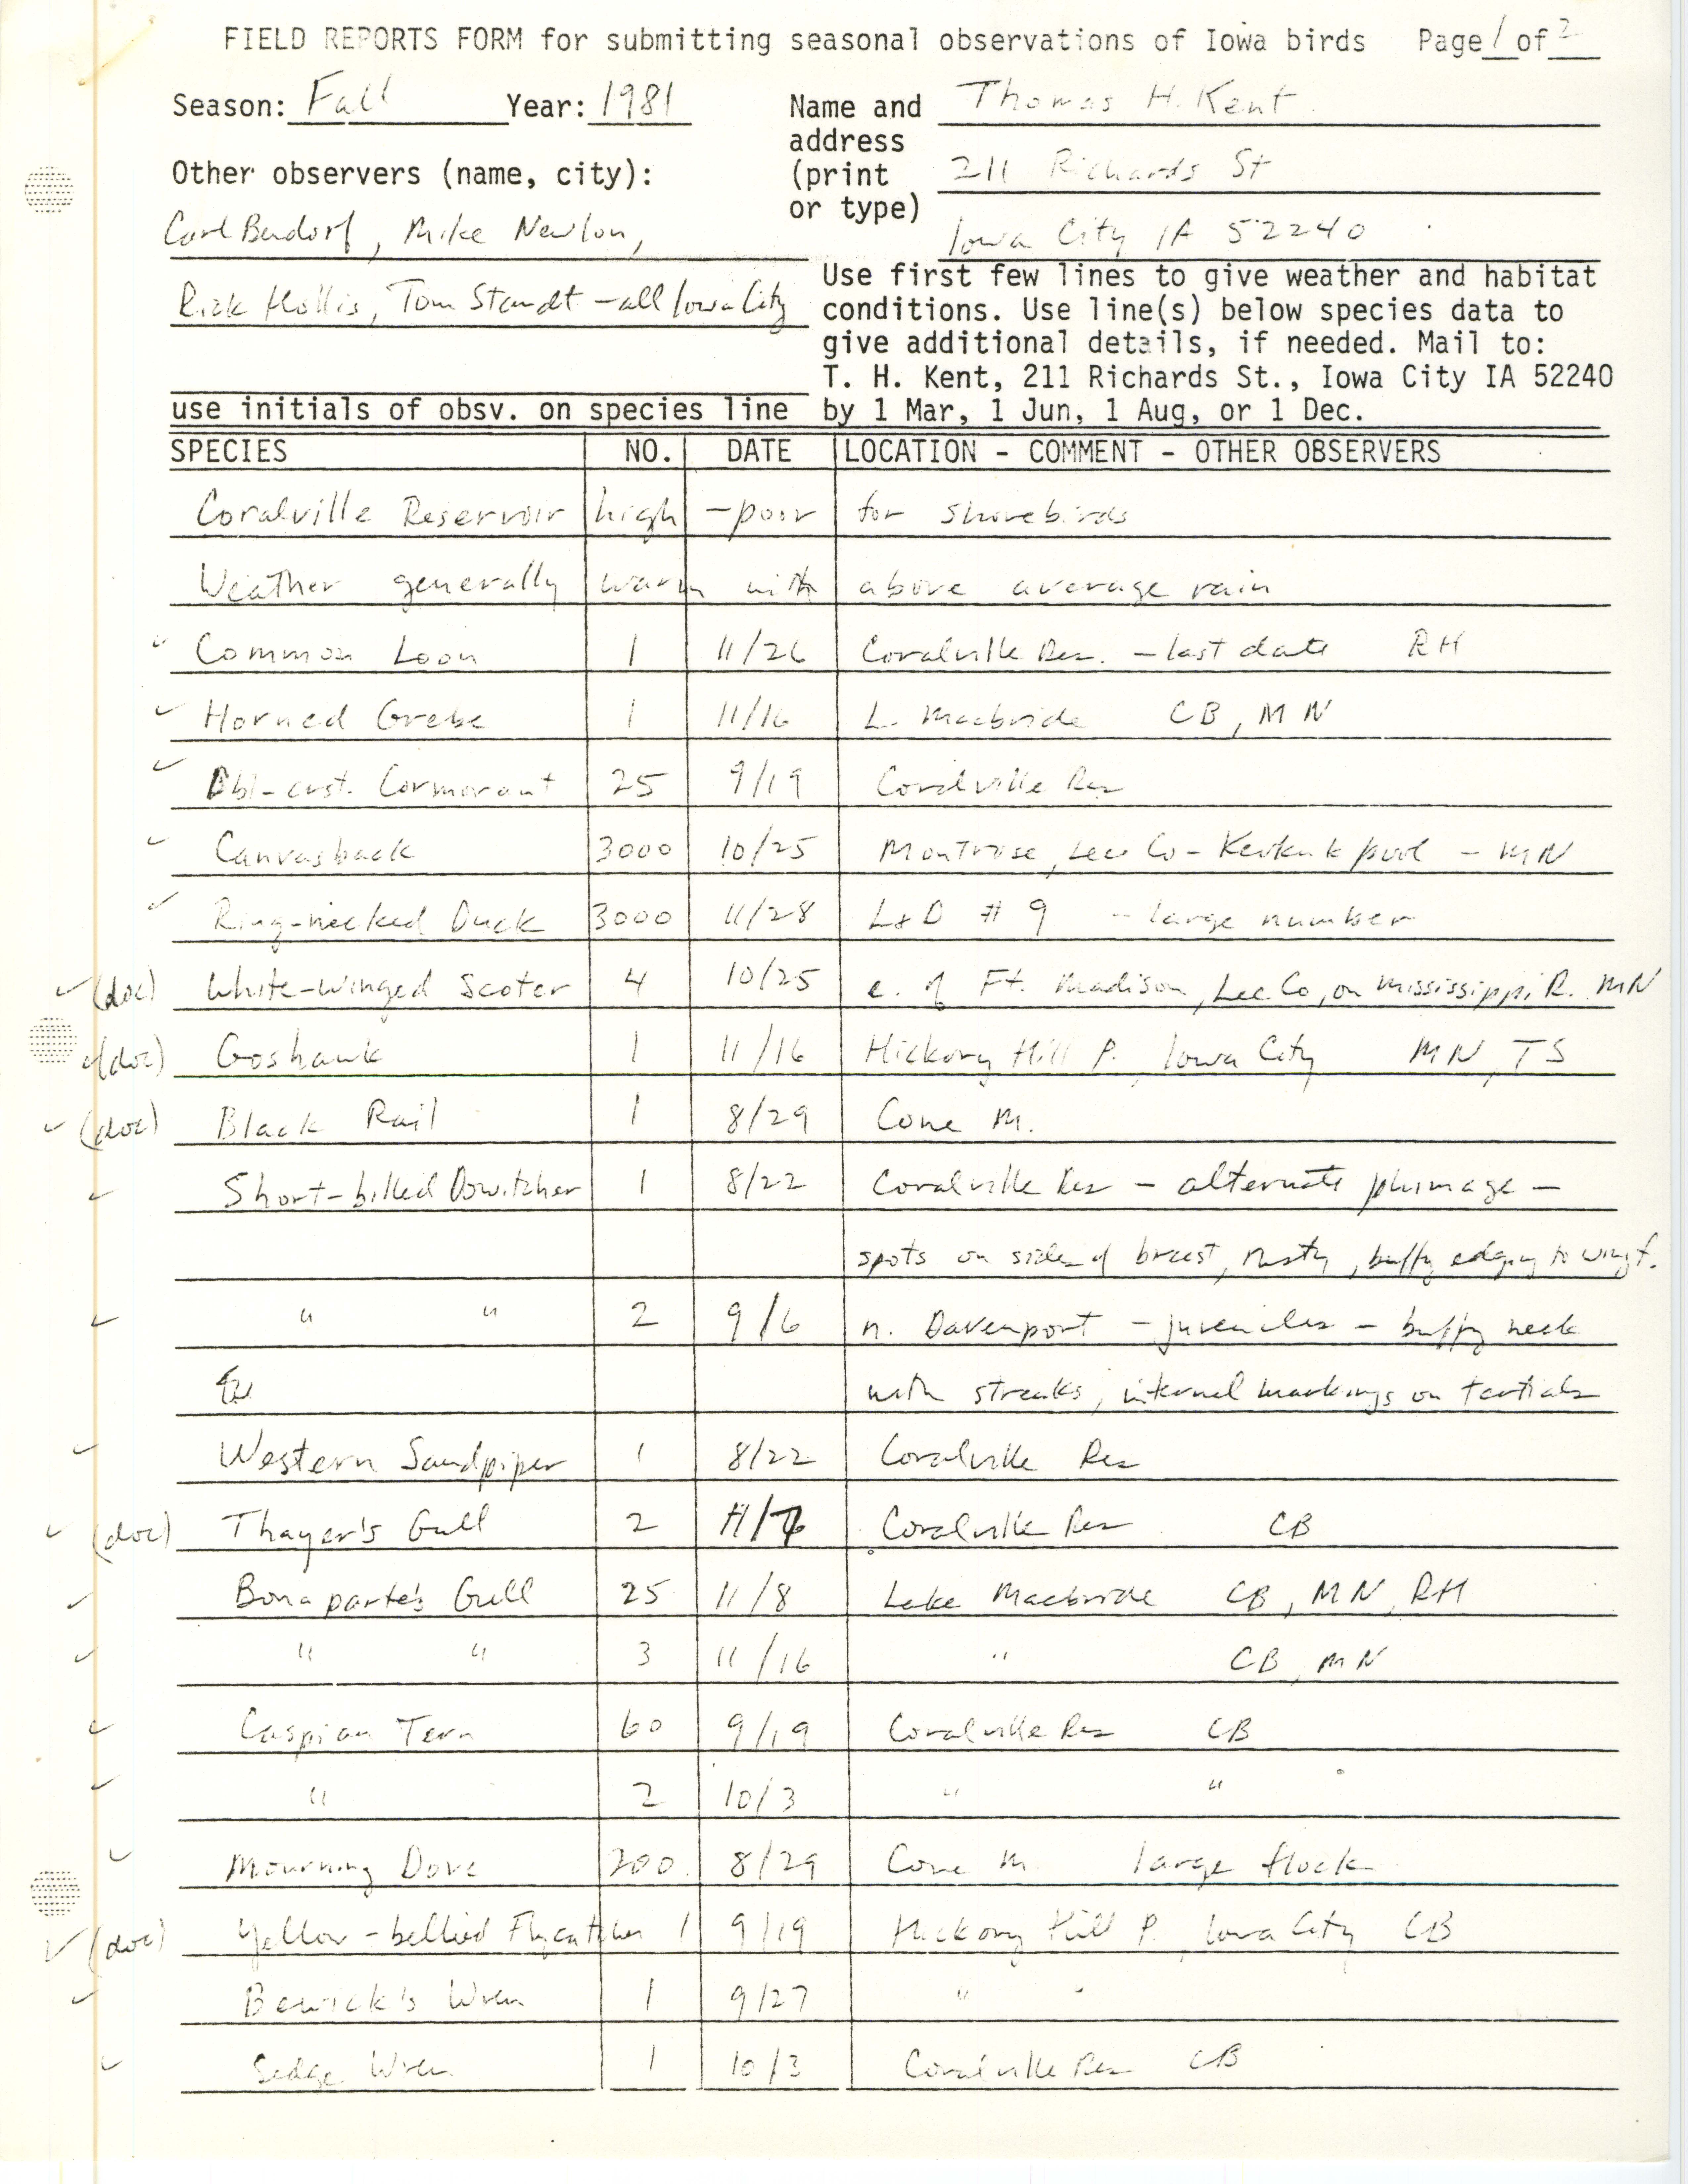 Field notes contributed by Thomas H. Kent with verifying documentation, fall 1981